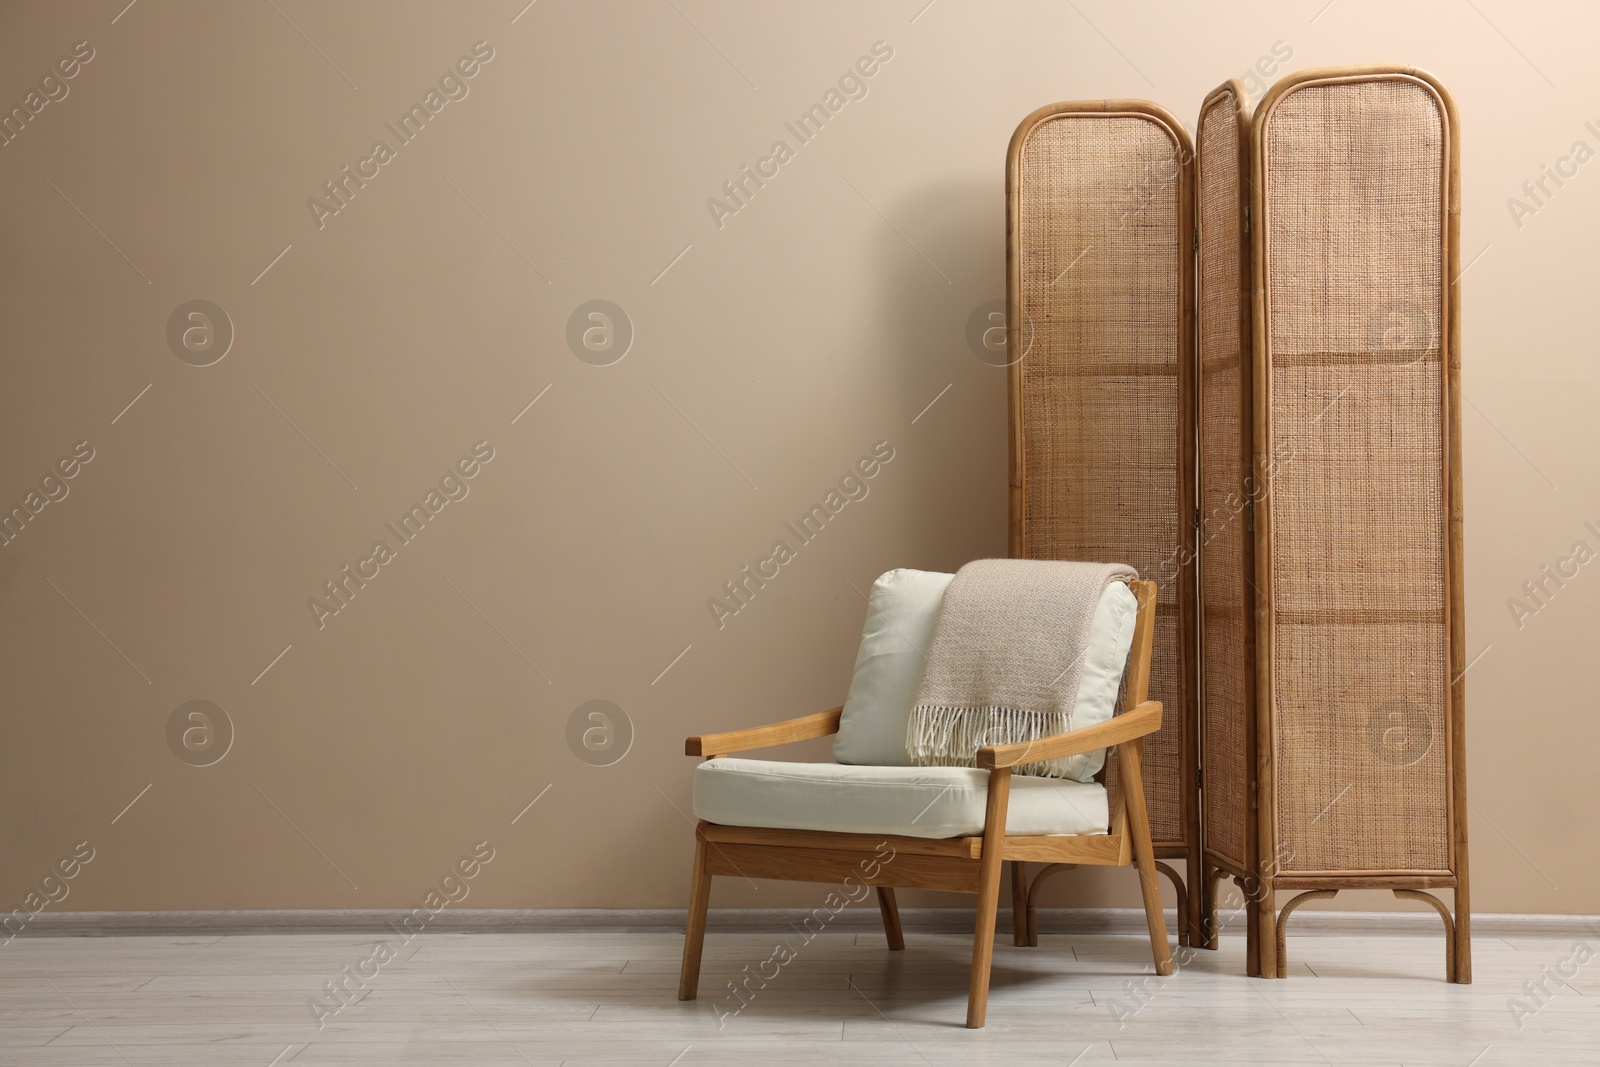 Photo of Folding screen, armchair and blanket near beige wall indoors, space for text